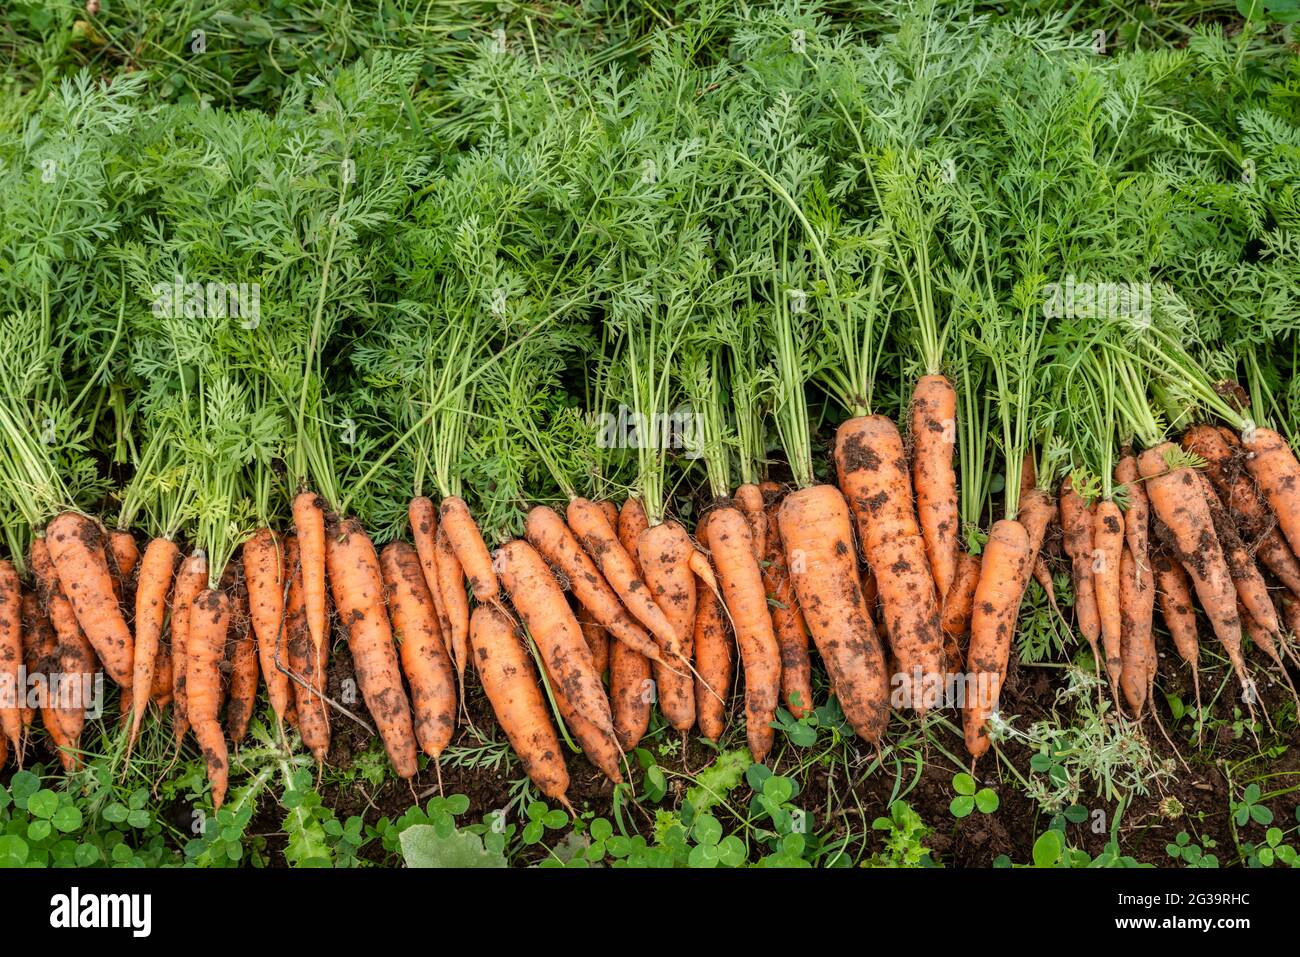 Harvested carrots rowed up to be stored Stock Photo